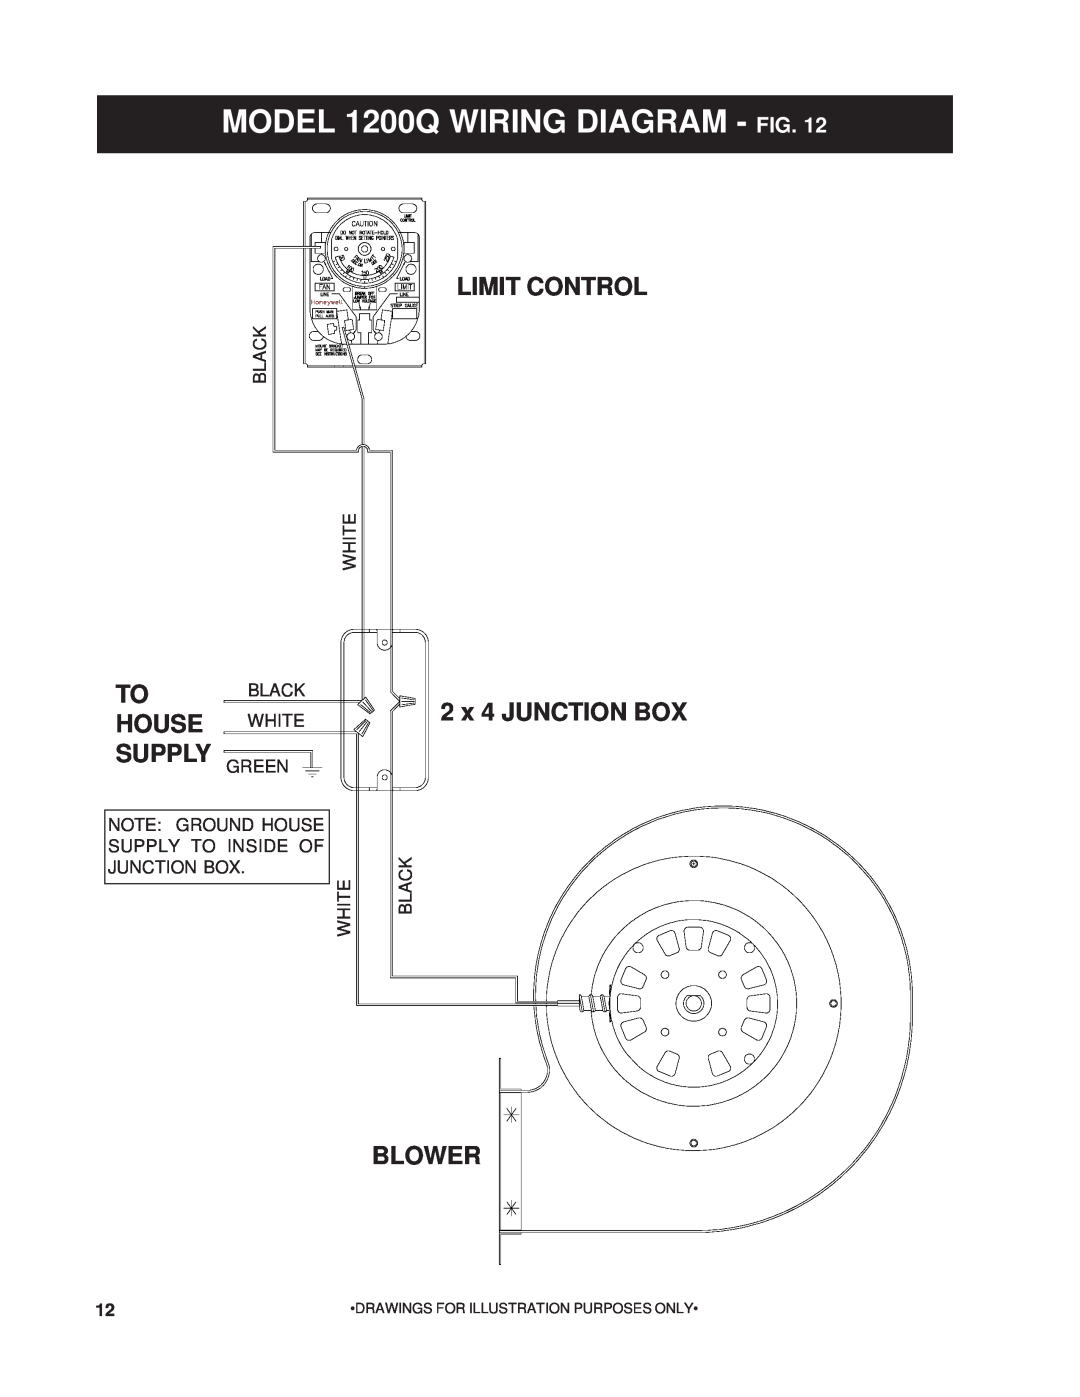 United States Stove MODEL 1200Q WIRING DIAGRAM - FIG, Limit Control, 2 x 4 JUNCTION BOX, Blower, To House Supply 